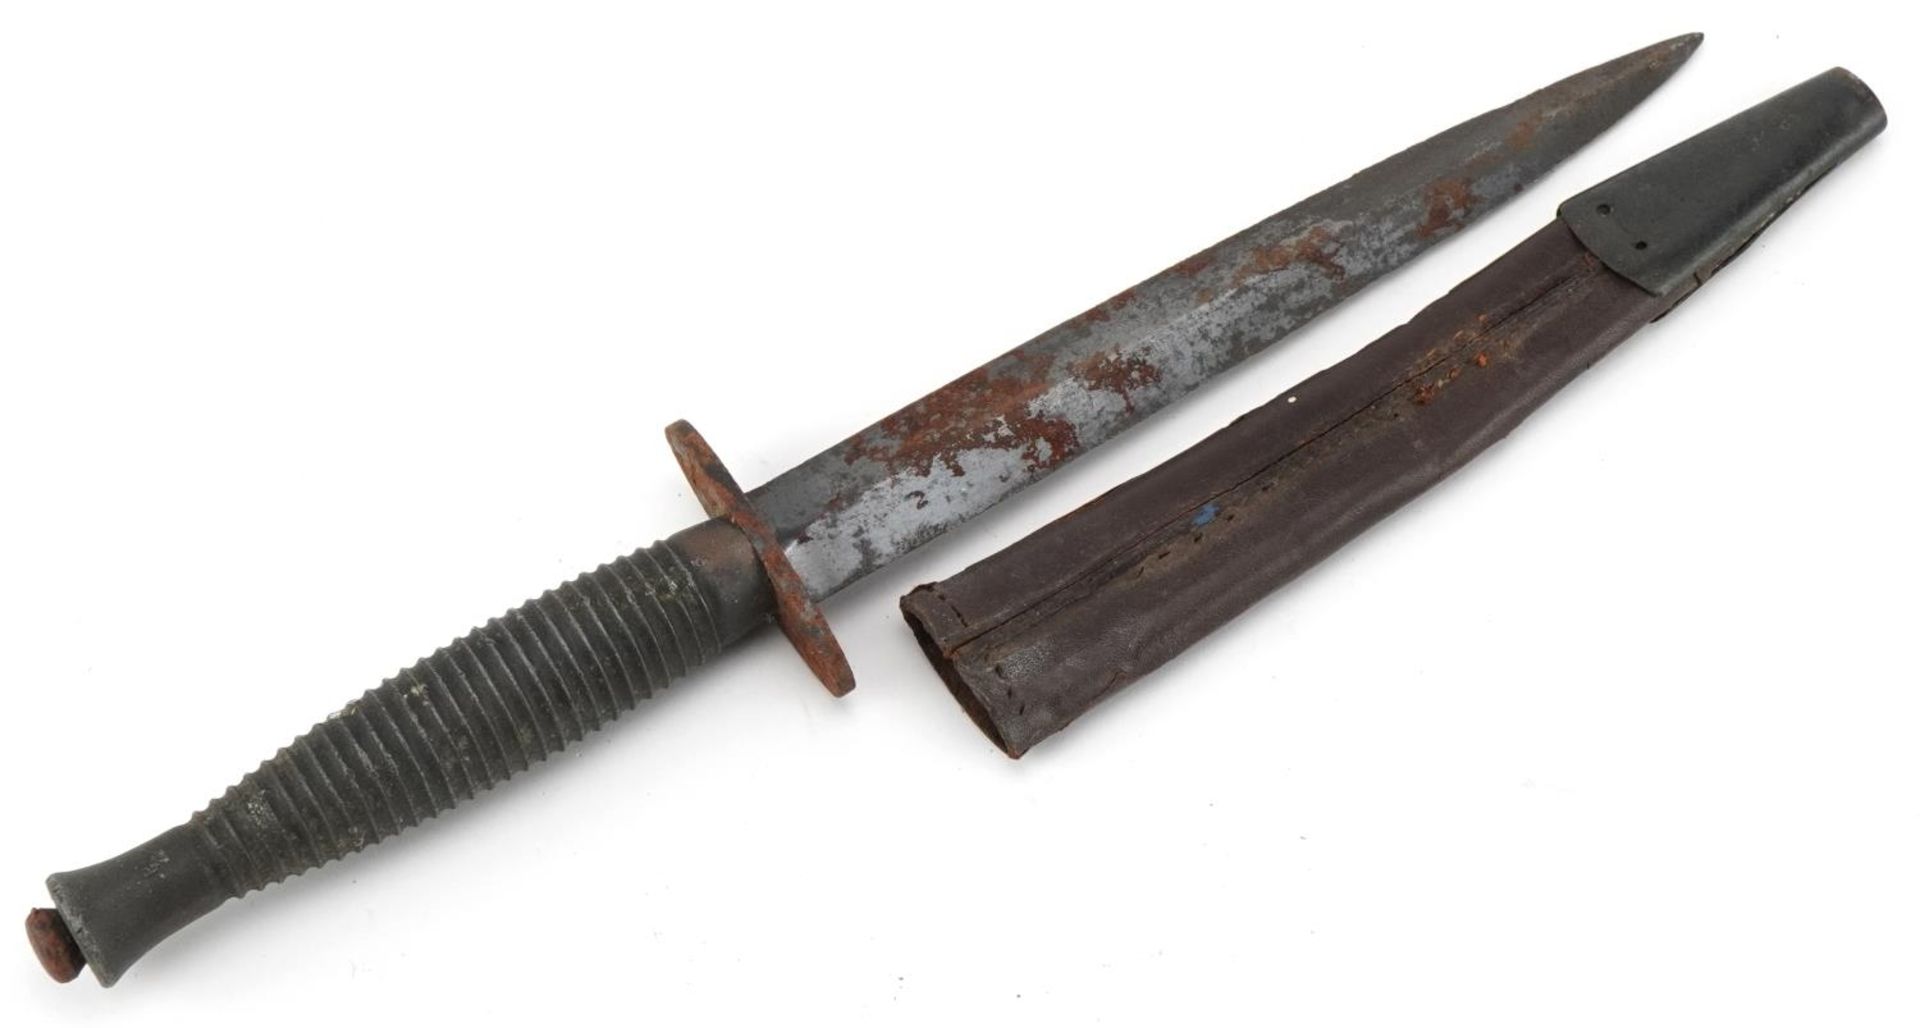 British military Fairbairn Sykes fighting knife with leather sheath and steel blade, 29.5cm in - Image 2 of 2